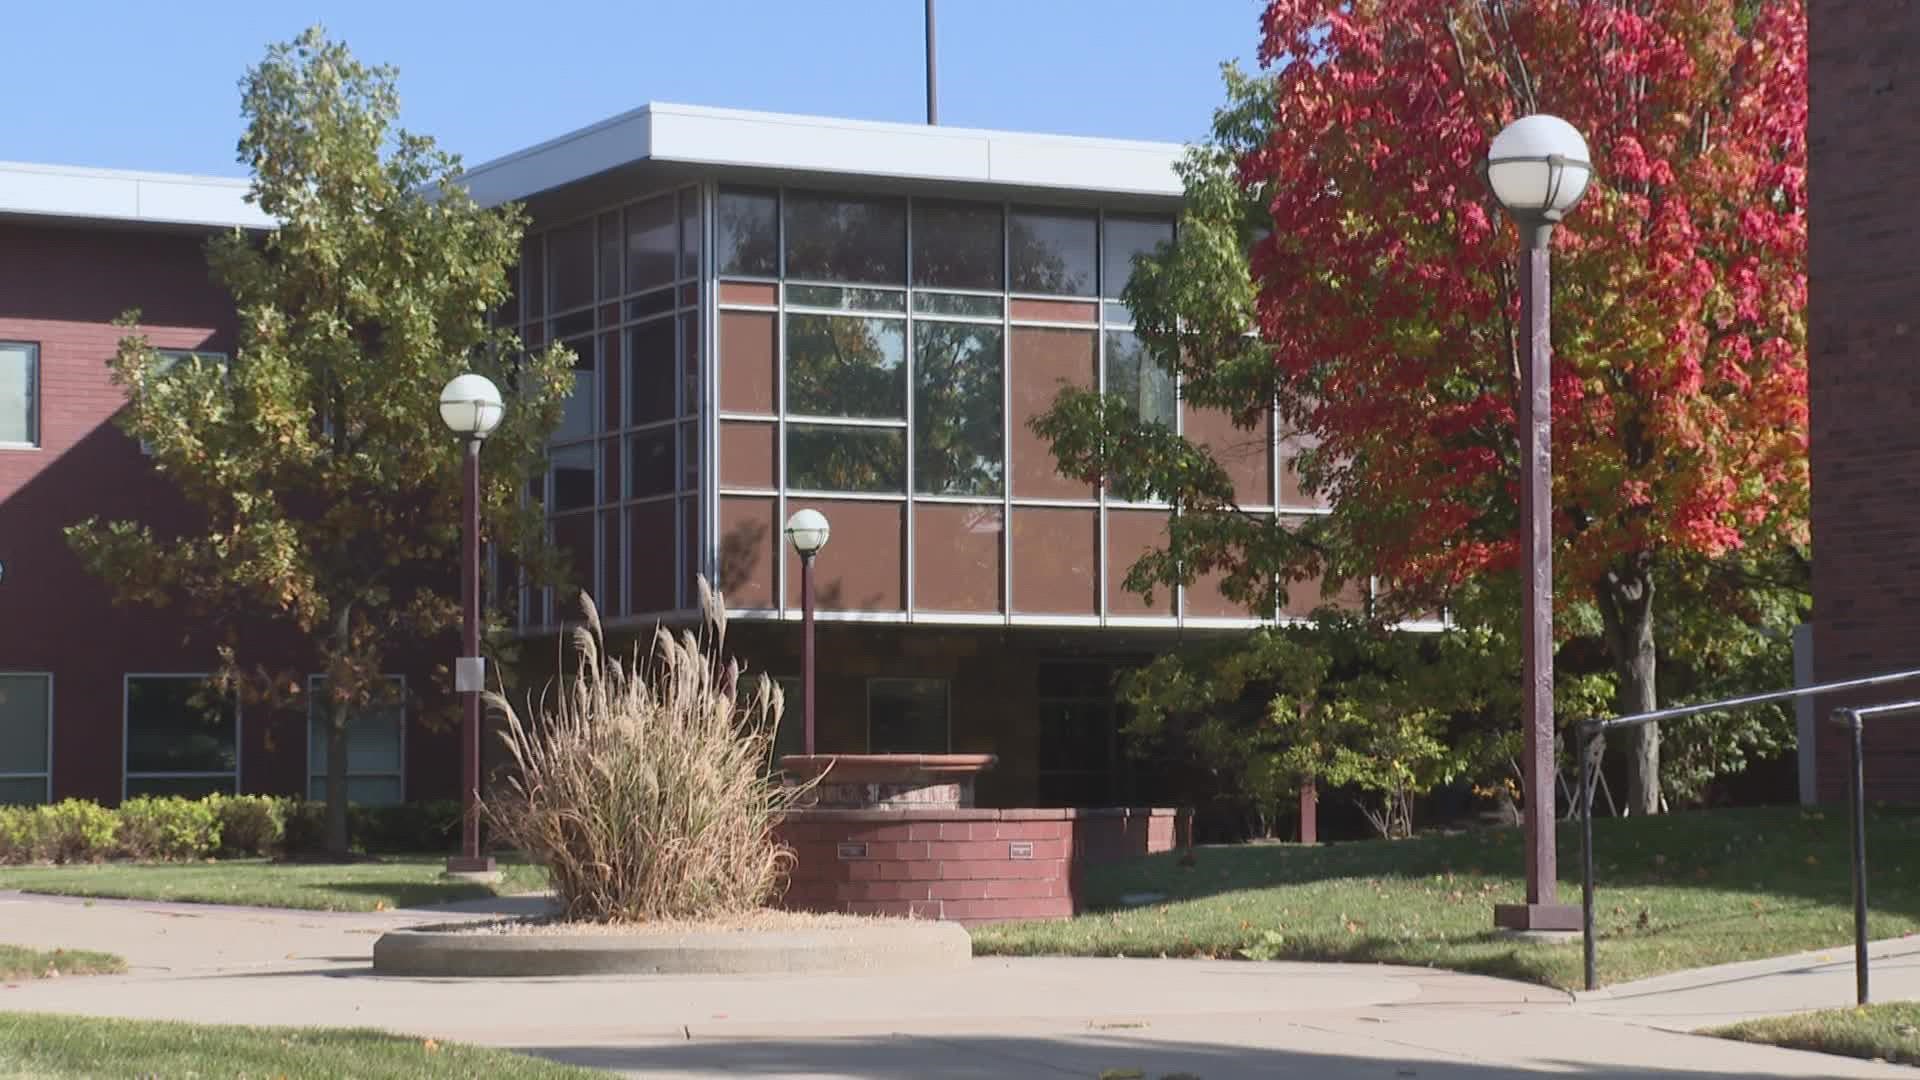 Officials said the reduction is aimed at making a Martin University degree more affordable and accessible.